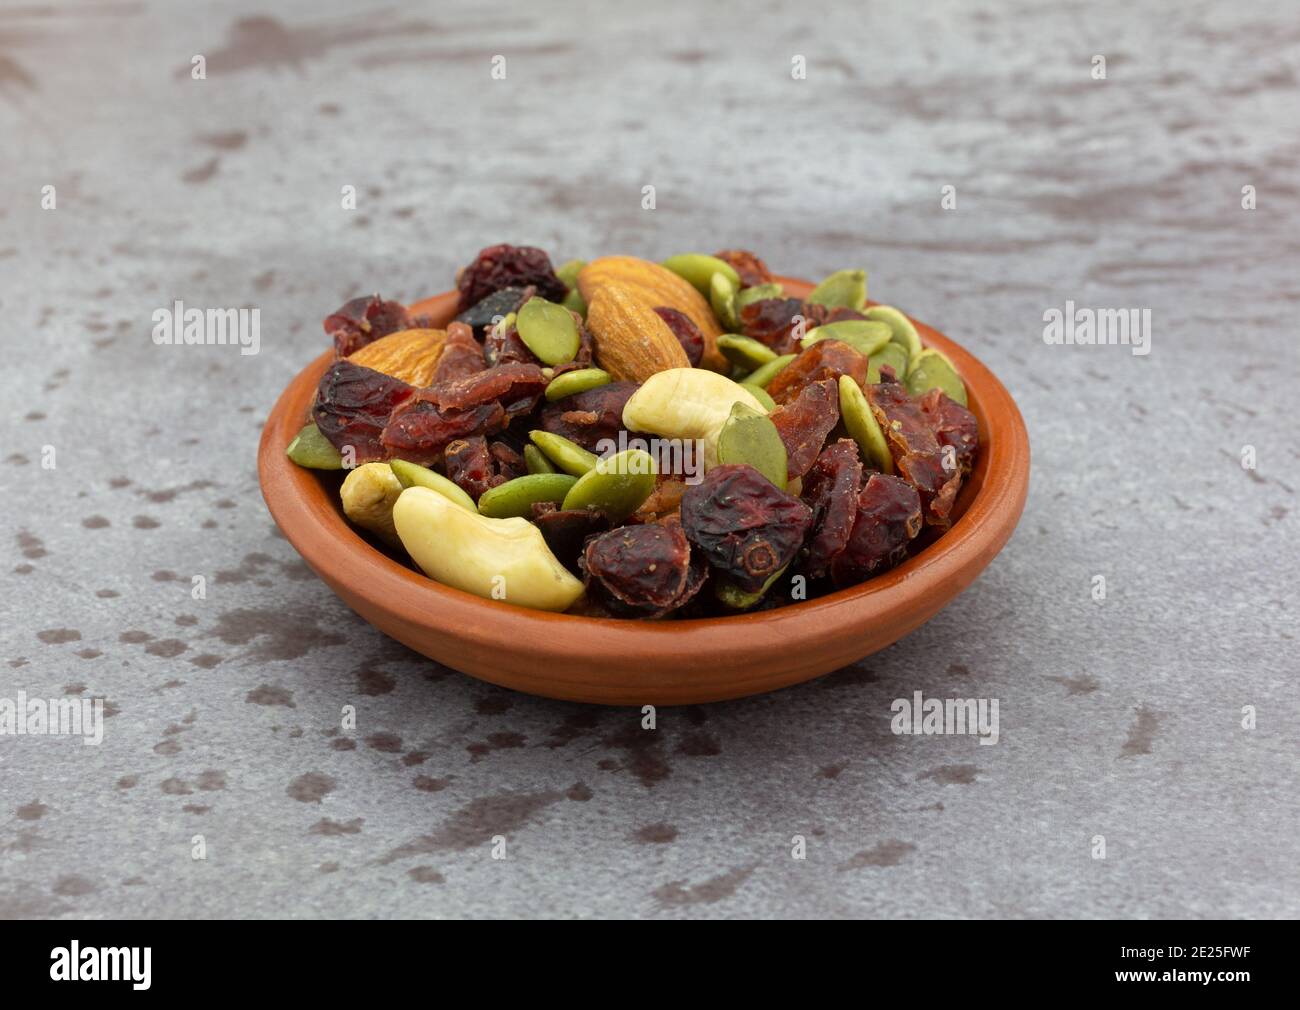 Side view of a small bowl filled with seeds, nuts and fruit on a gray background. Stock Photo